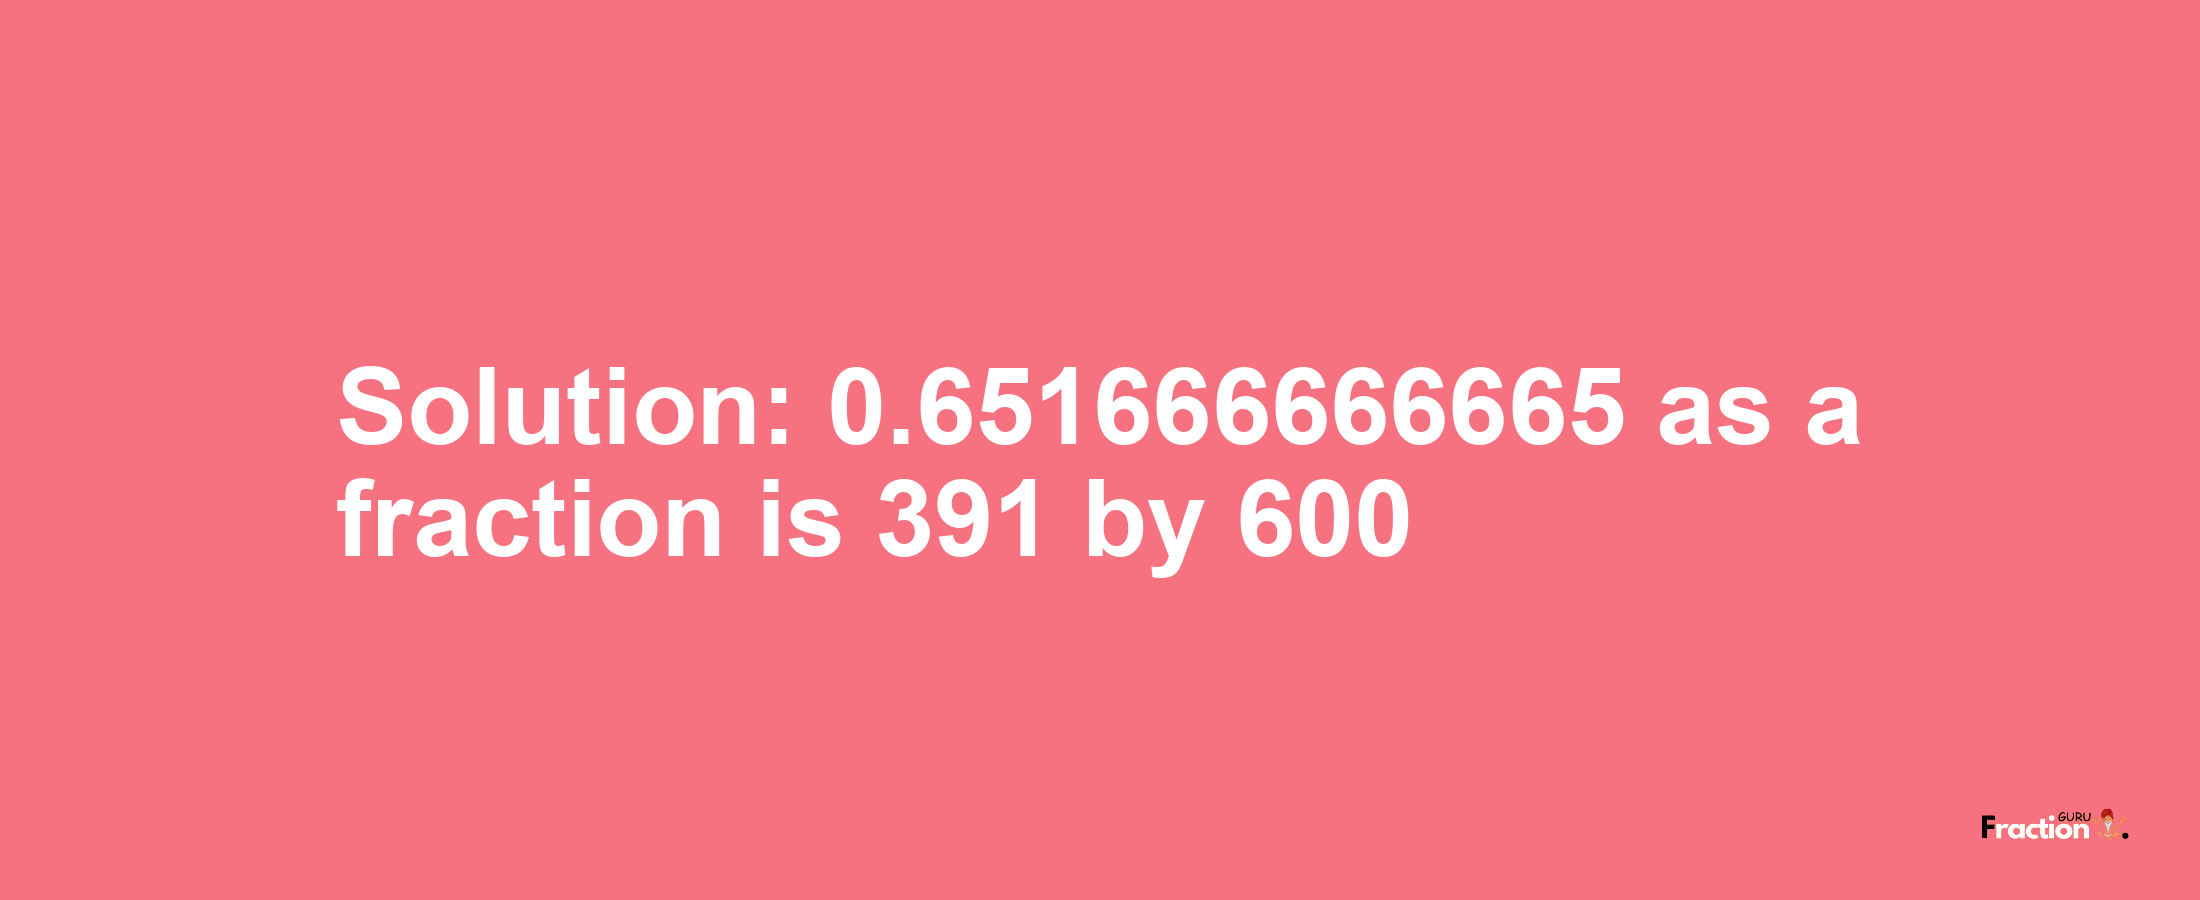 Solution:0.651666666665 as a fraction is 391/600